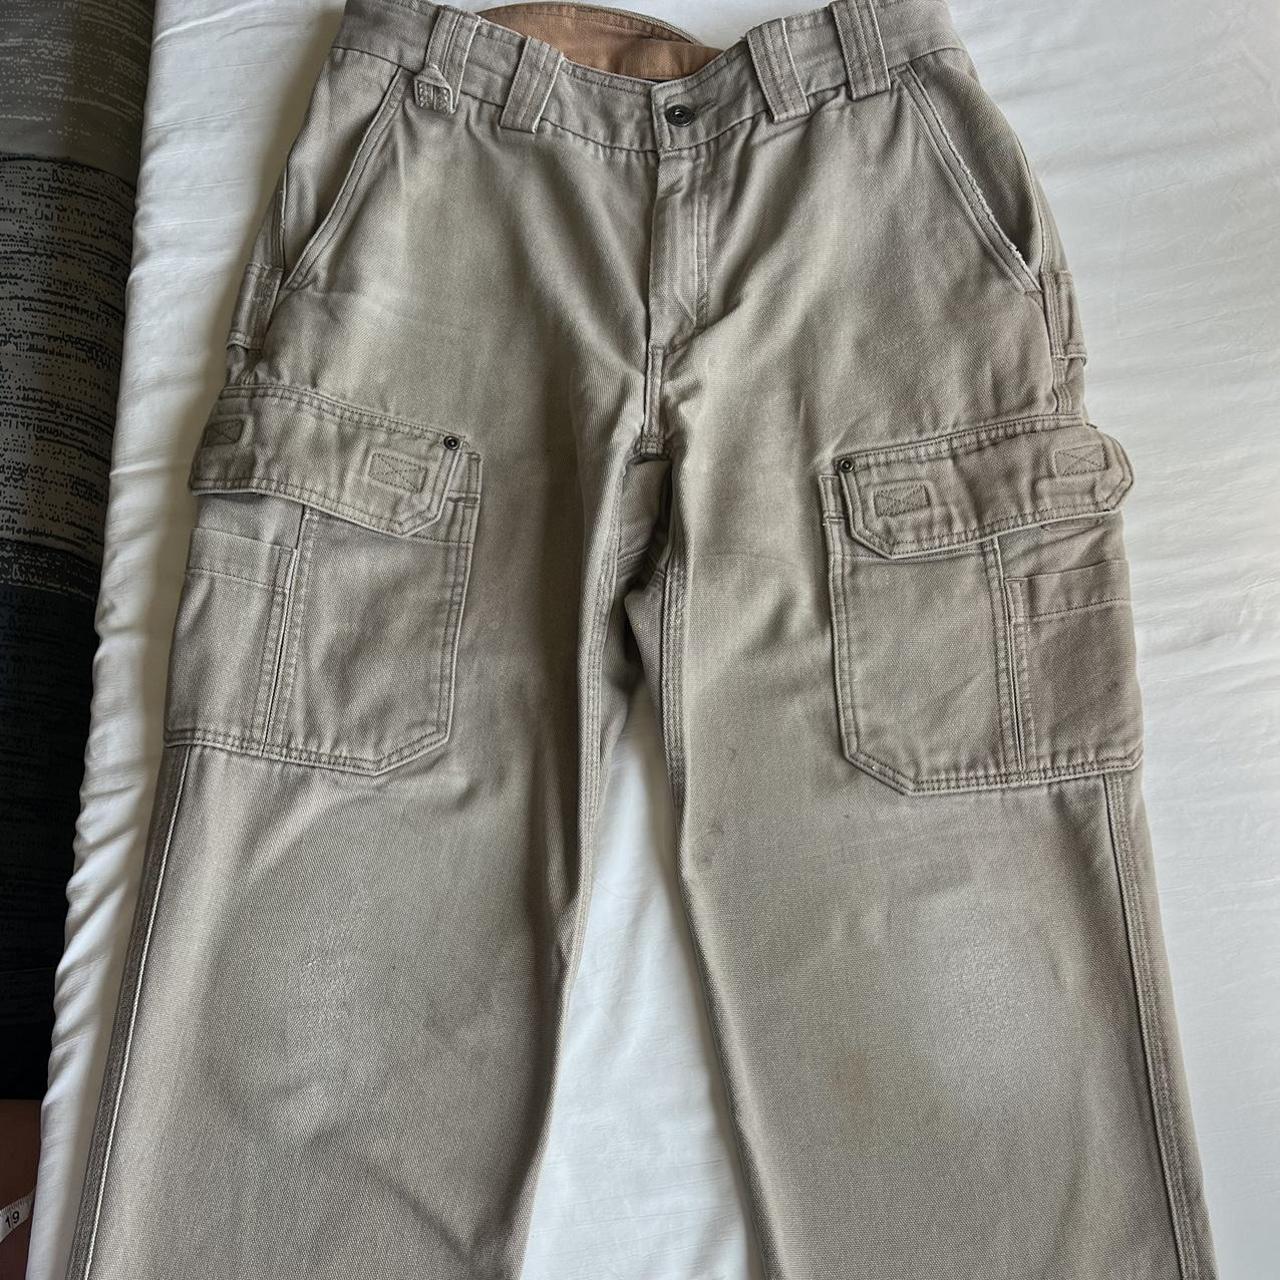 Duluth Trading Company Men's Khaki and Cream Trousers